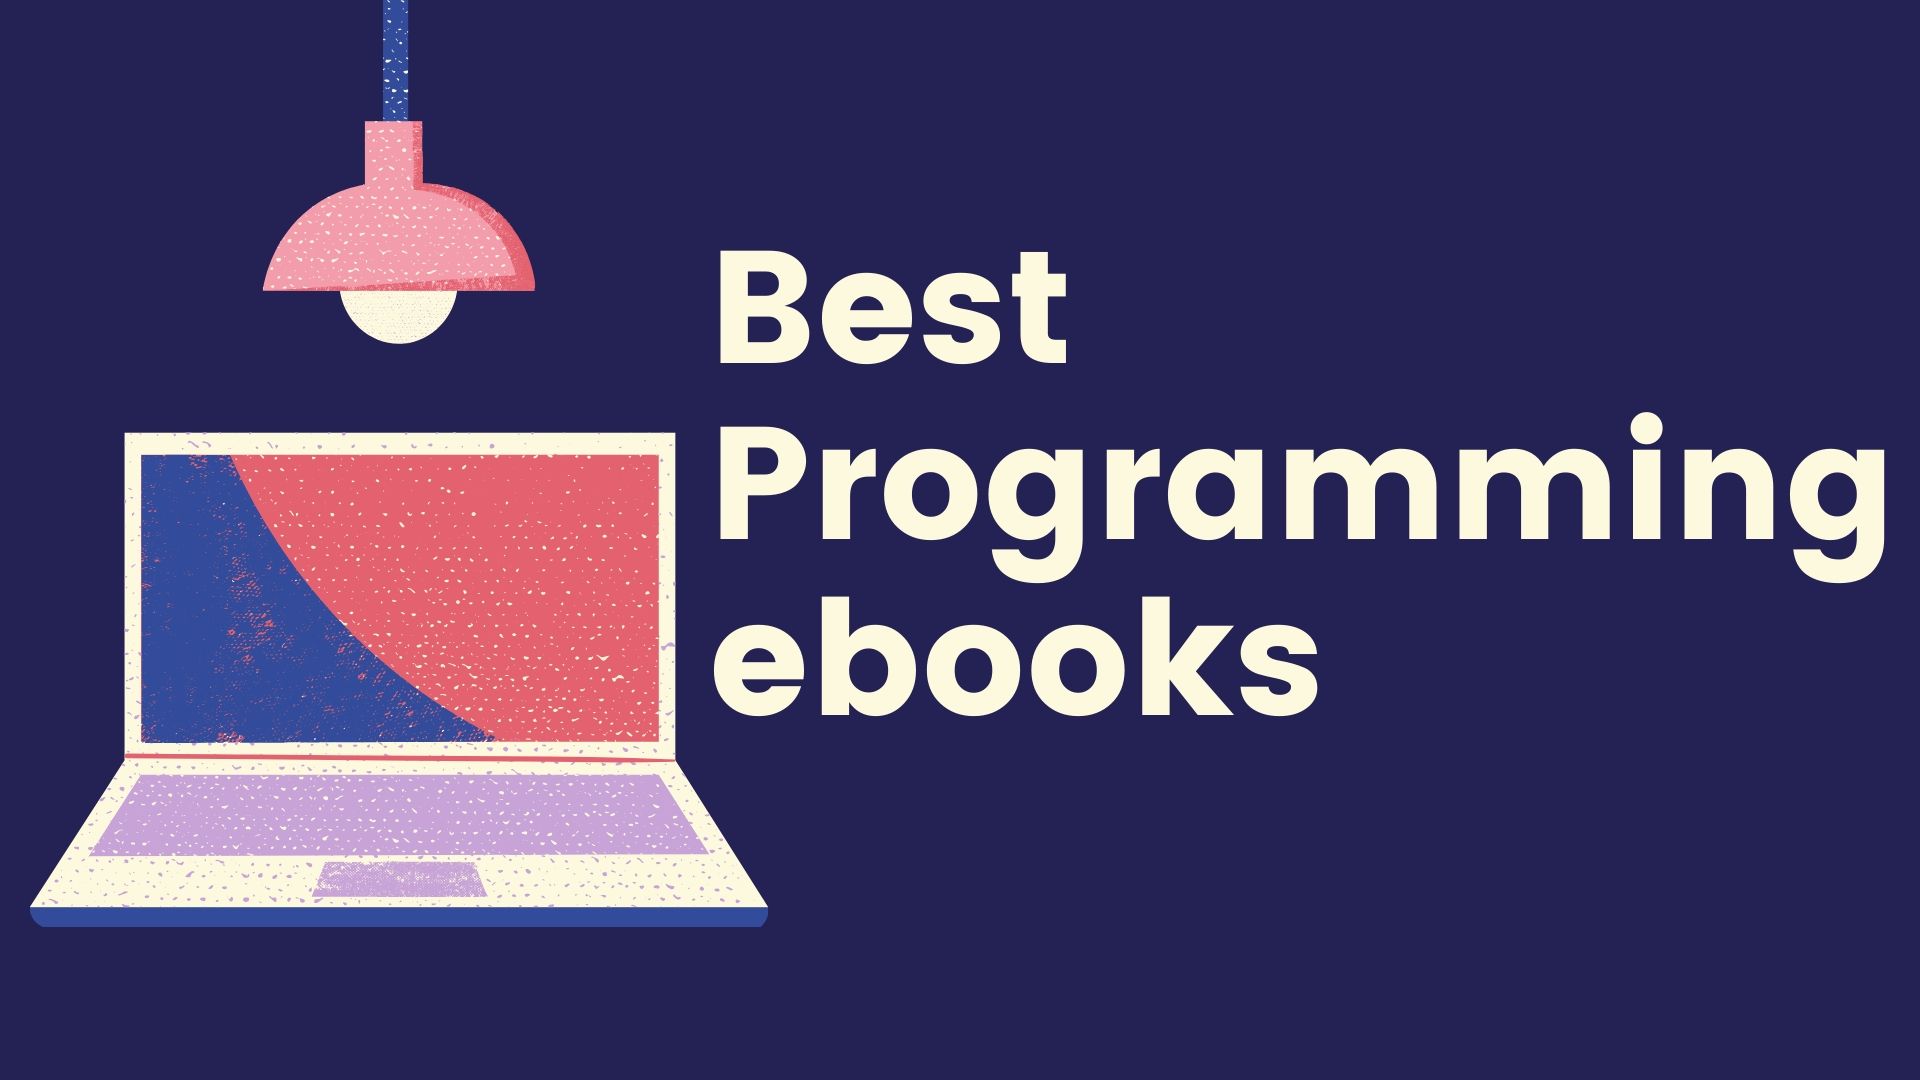 List of best eBooks to learn Programming from Home